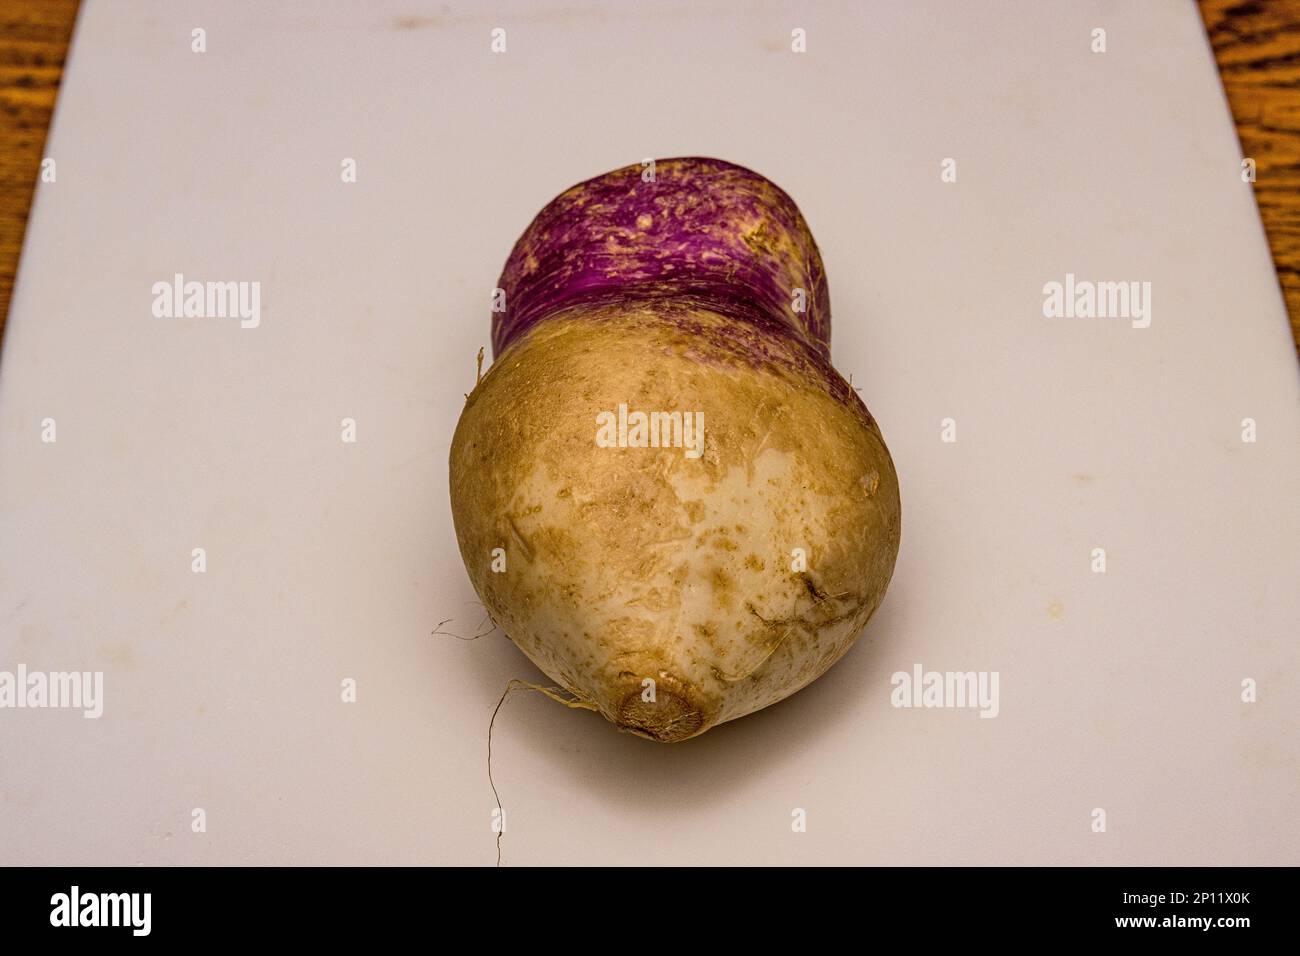 A common turnip with an odd shape on a kitchen cutting board Stock Photo